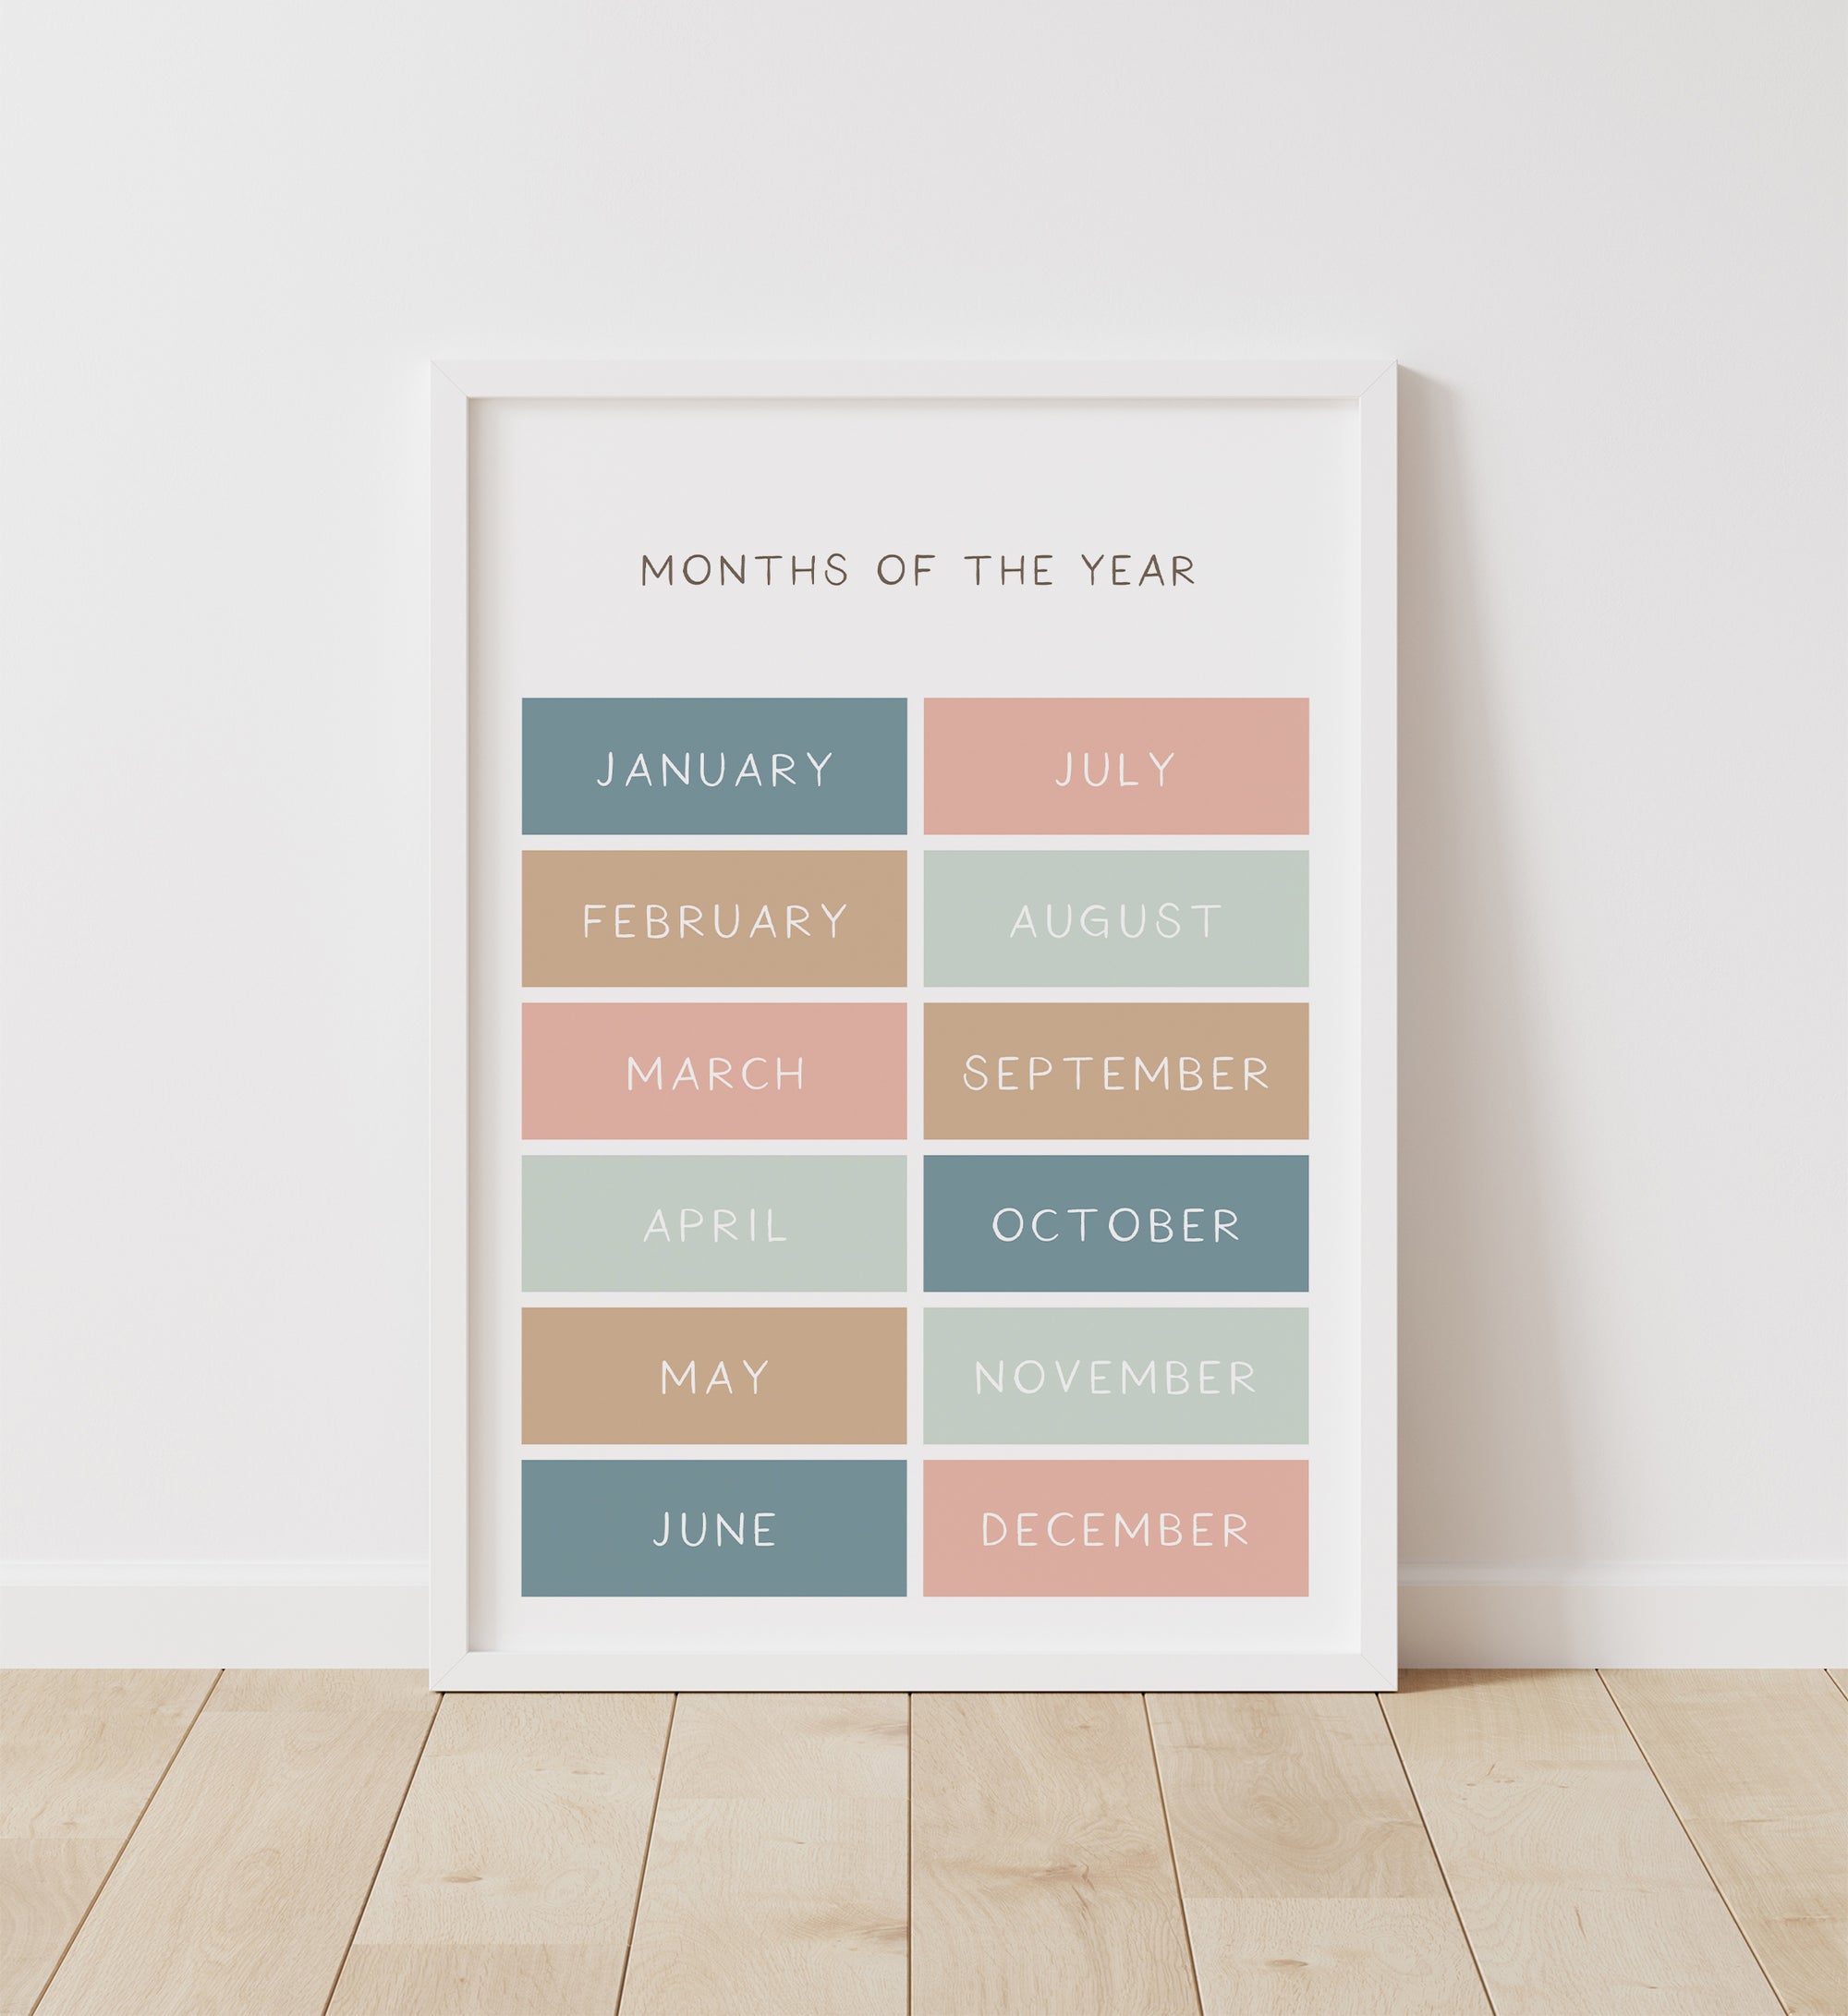 Months of the Year Print - MPCP